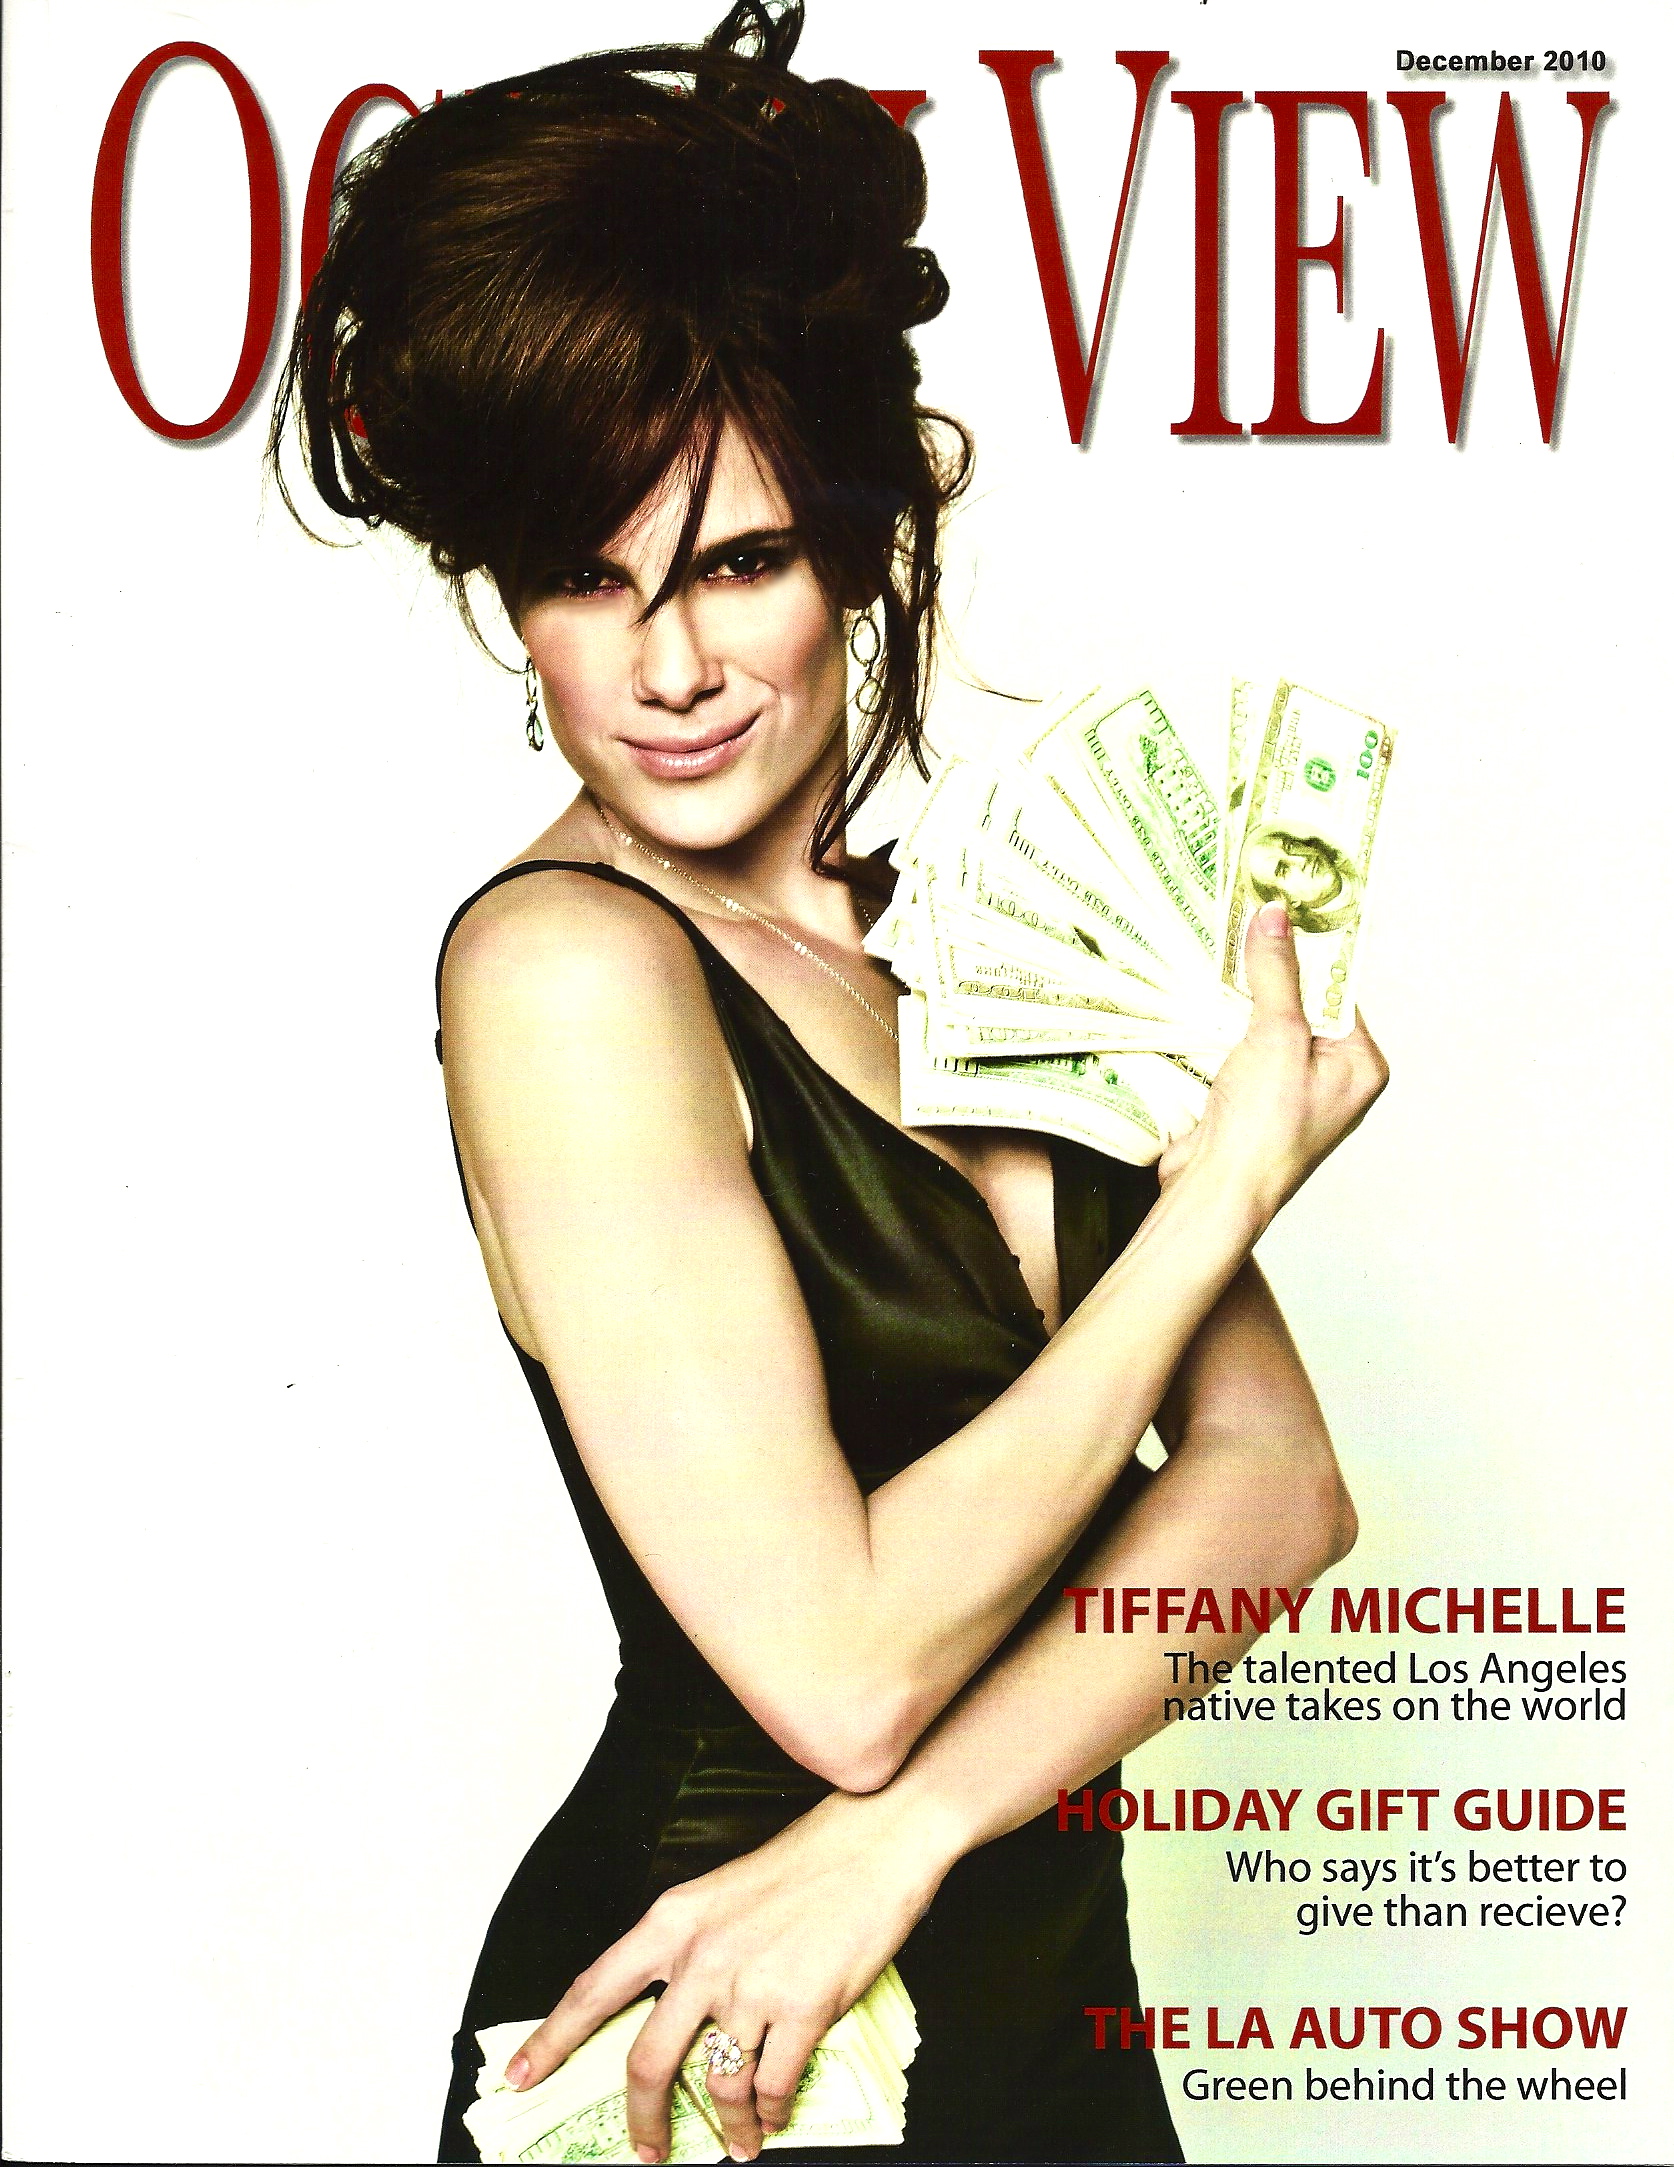 Tiffany Michelle on the December 2010 cover of Ocean View magazine.